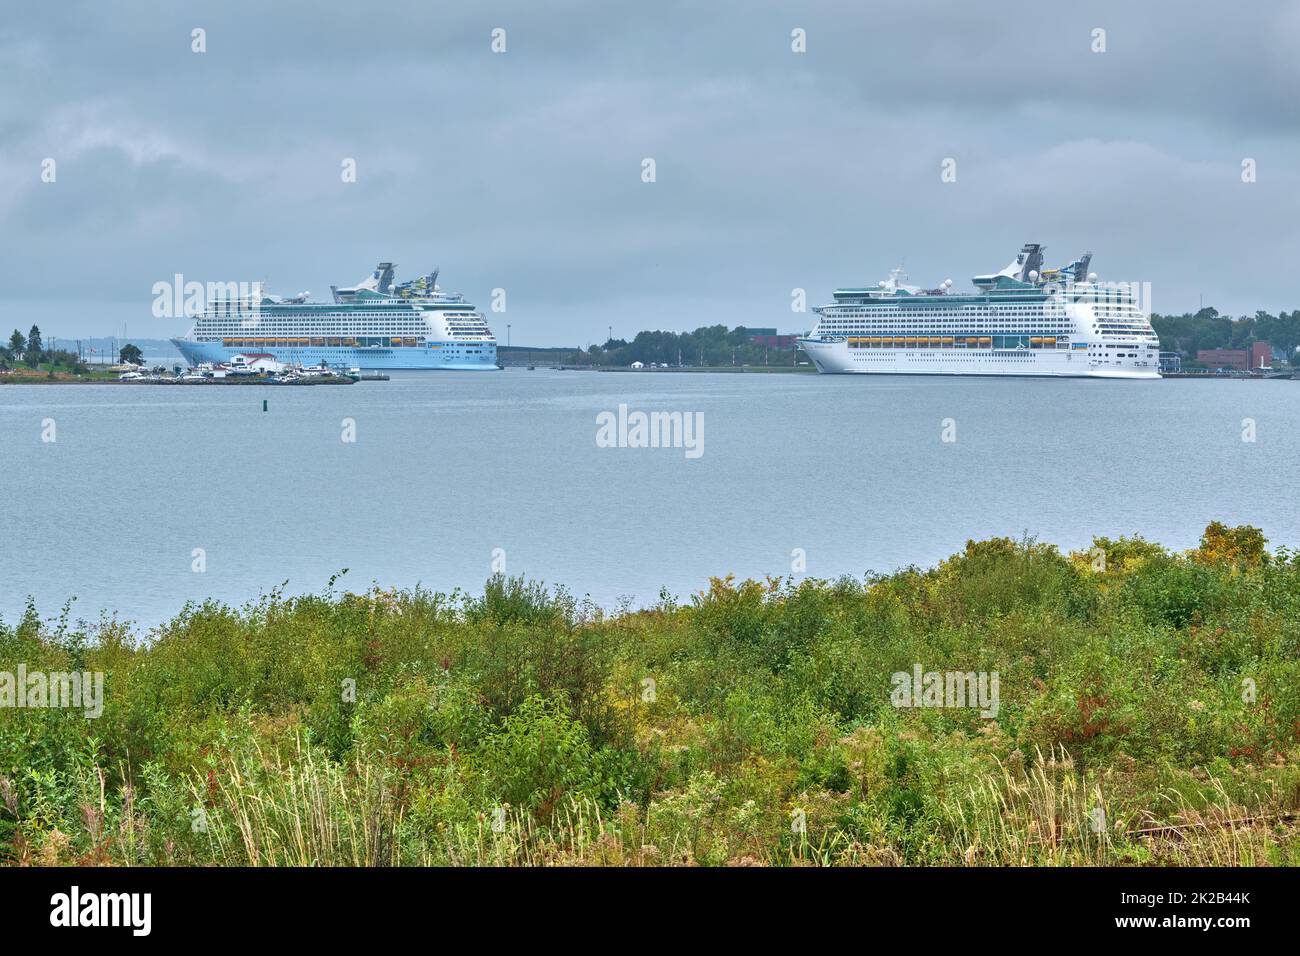 Two cruiseships safely moored in the harbour at Sydney Nova Scotia two days before Hurricane Fiona is expected to make landfall in Cape Breton. Stock Photo